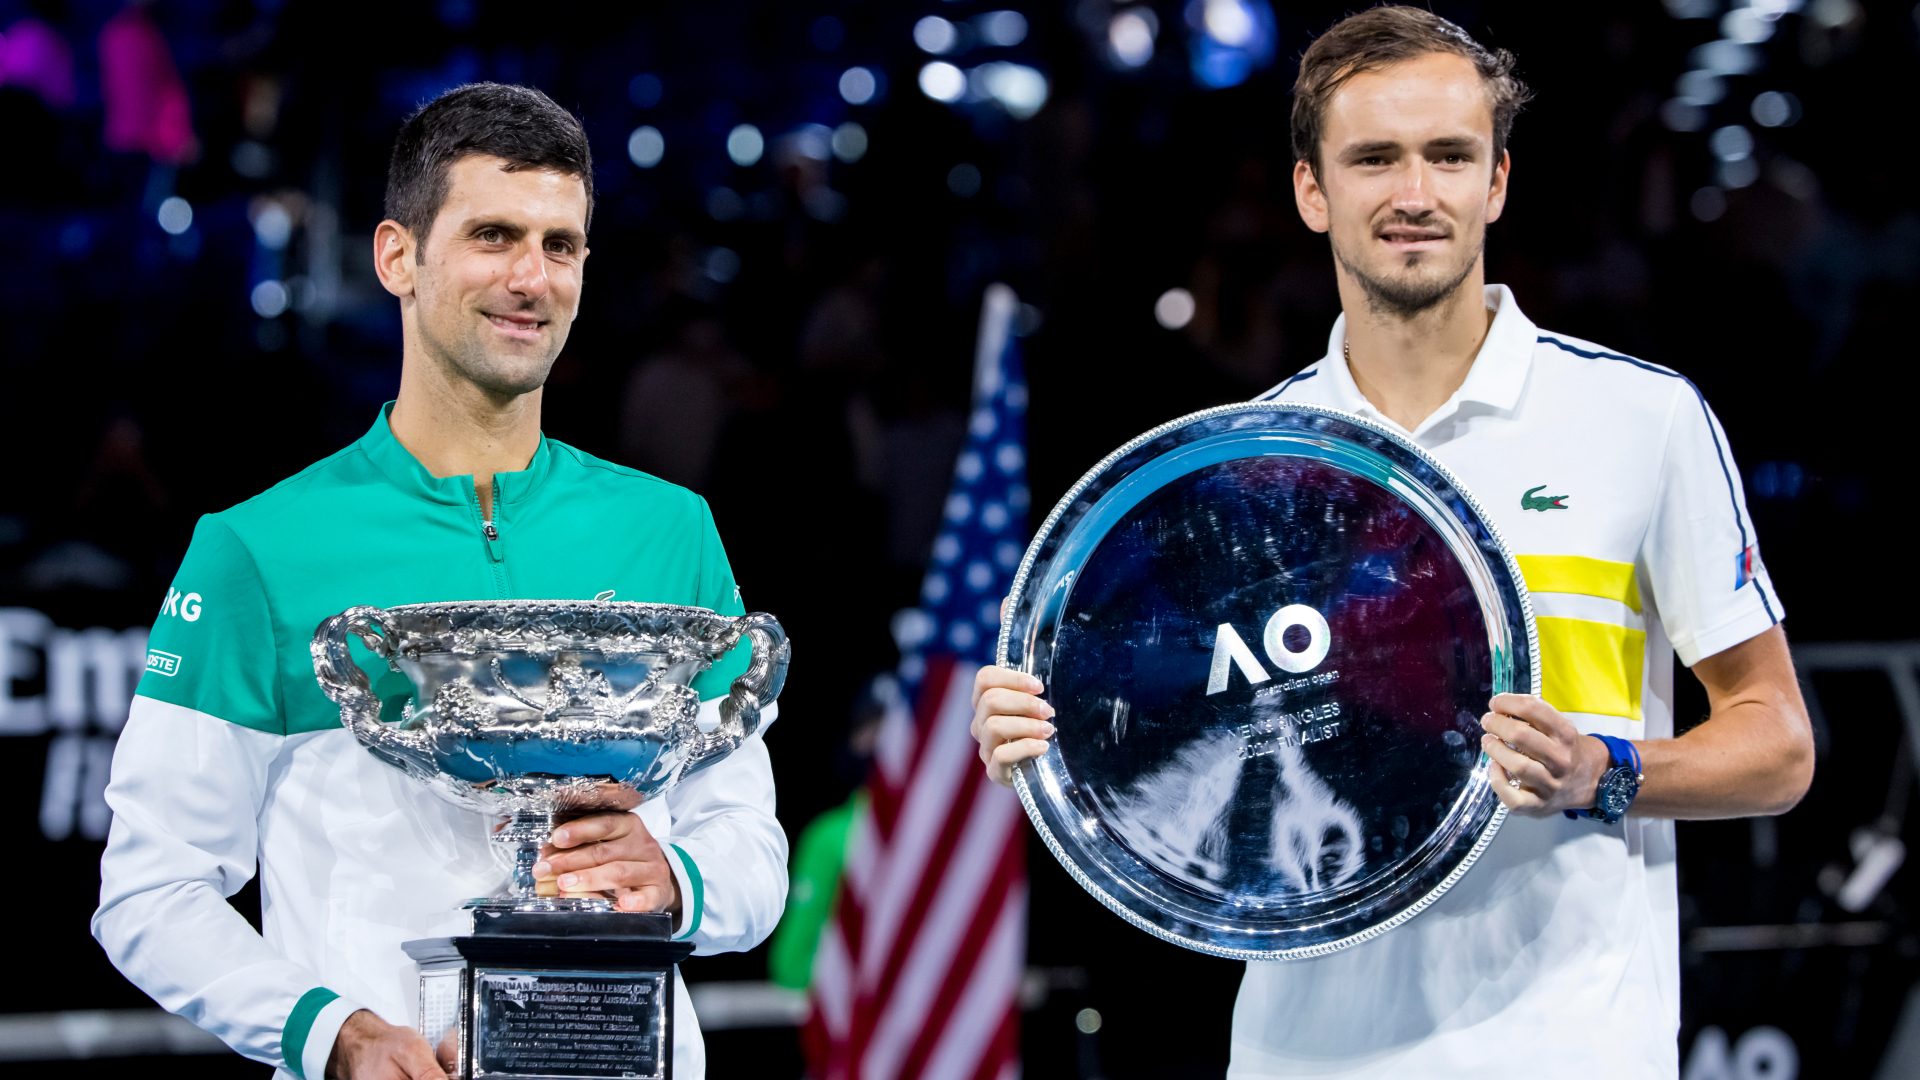 Novak Djokovic and Rafael Nadal have won 10 of the past 11 grand slams as the greats continue to dominate.